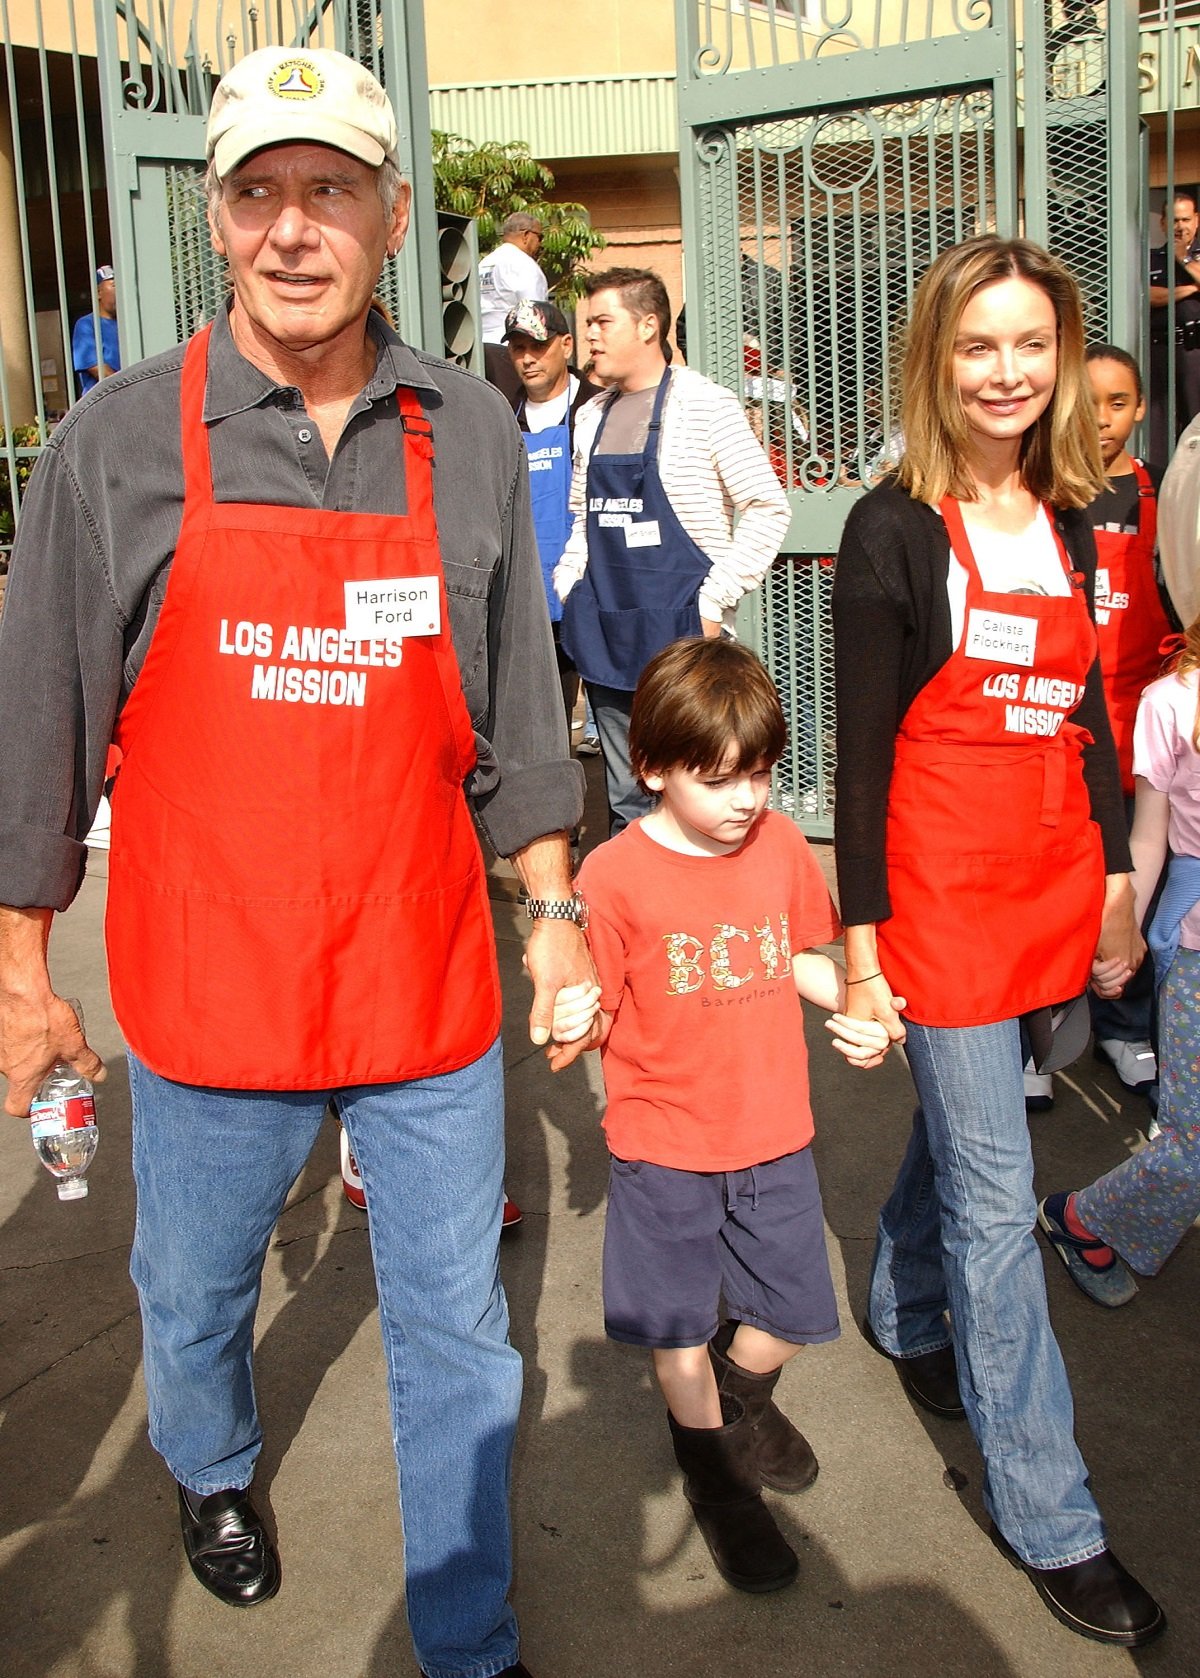 Harrison Ford, Calista Flockhart, and son Liam on November 21, 2007 in Downtown Los Angeles, California | Source: Getty Images